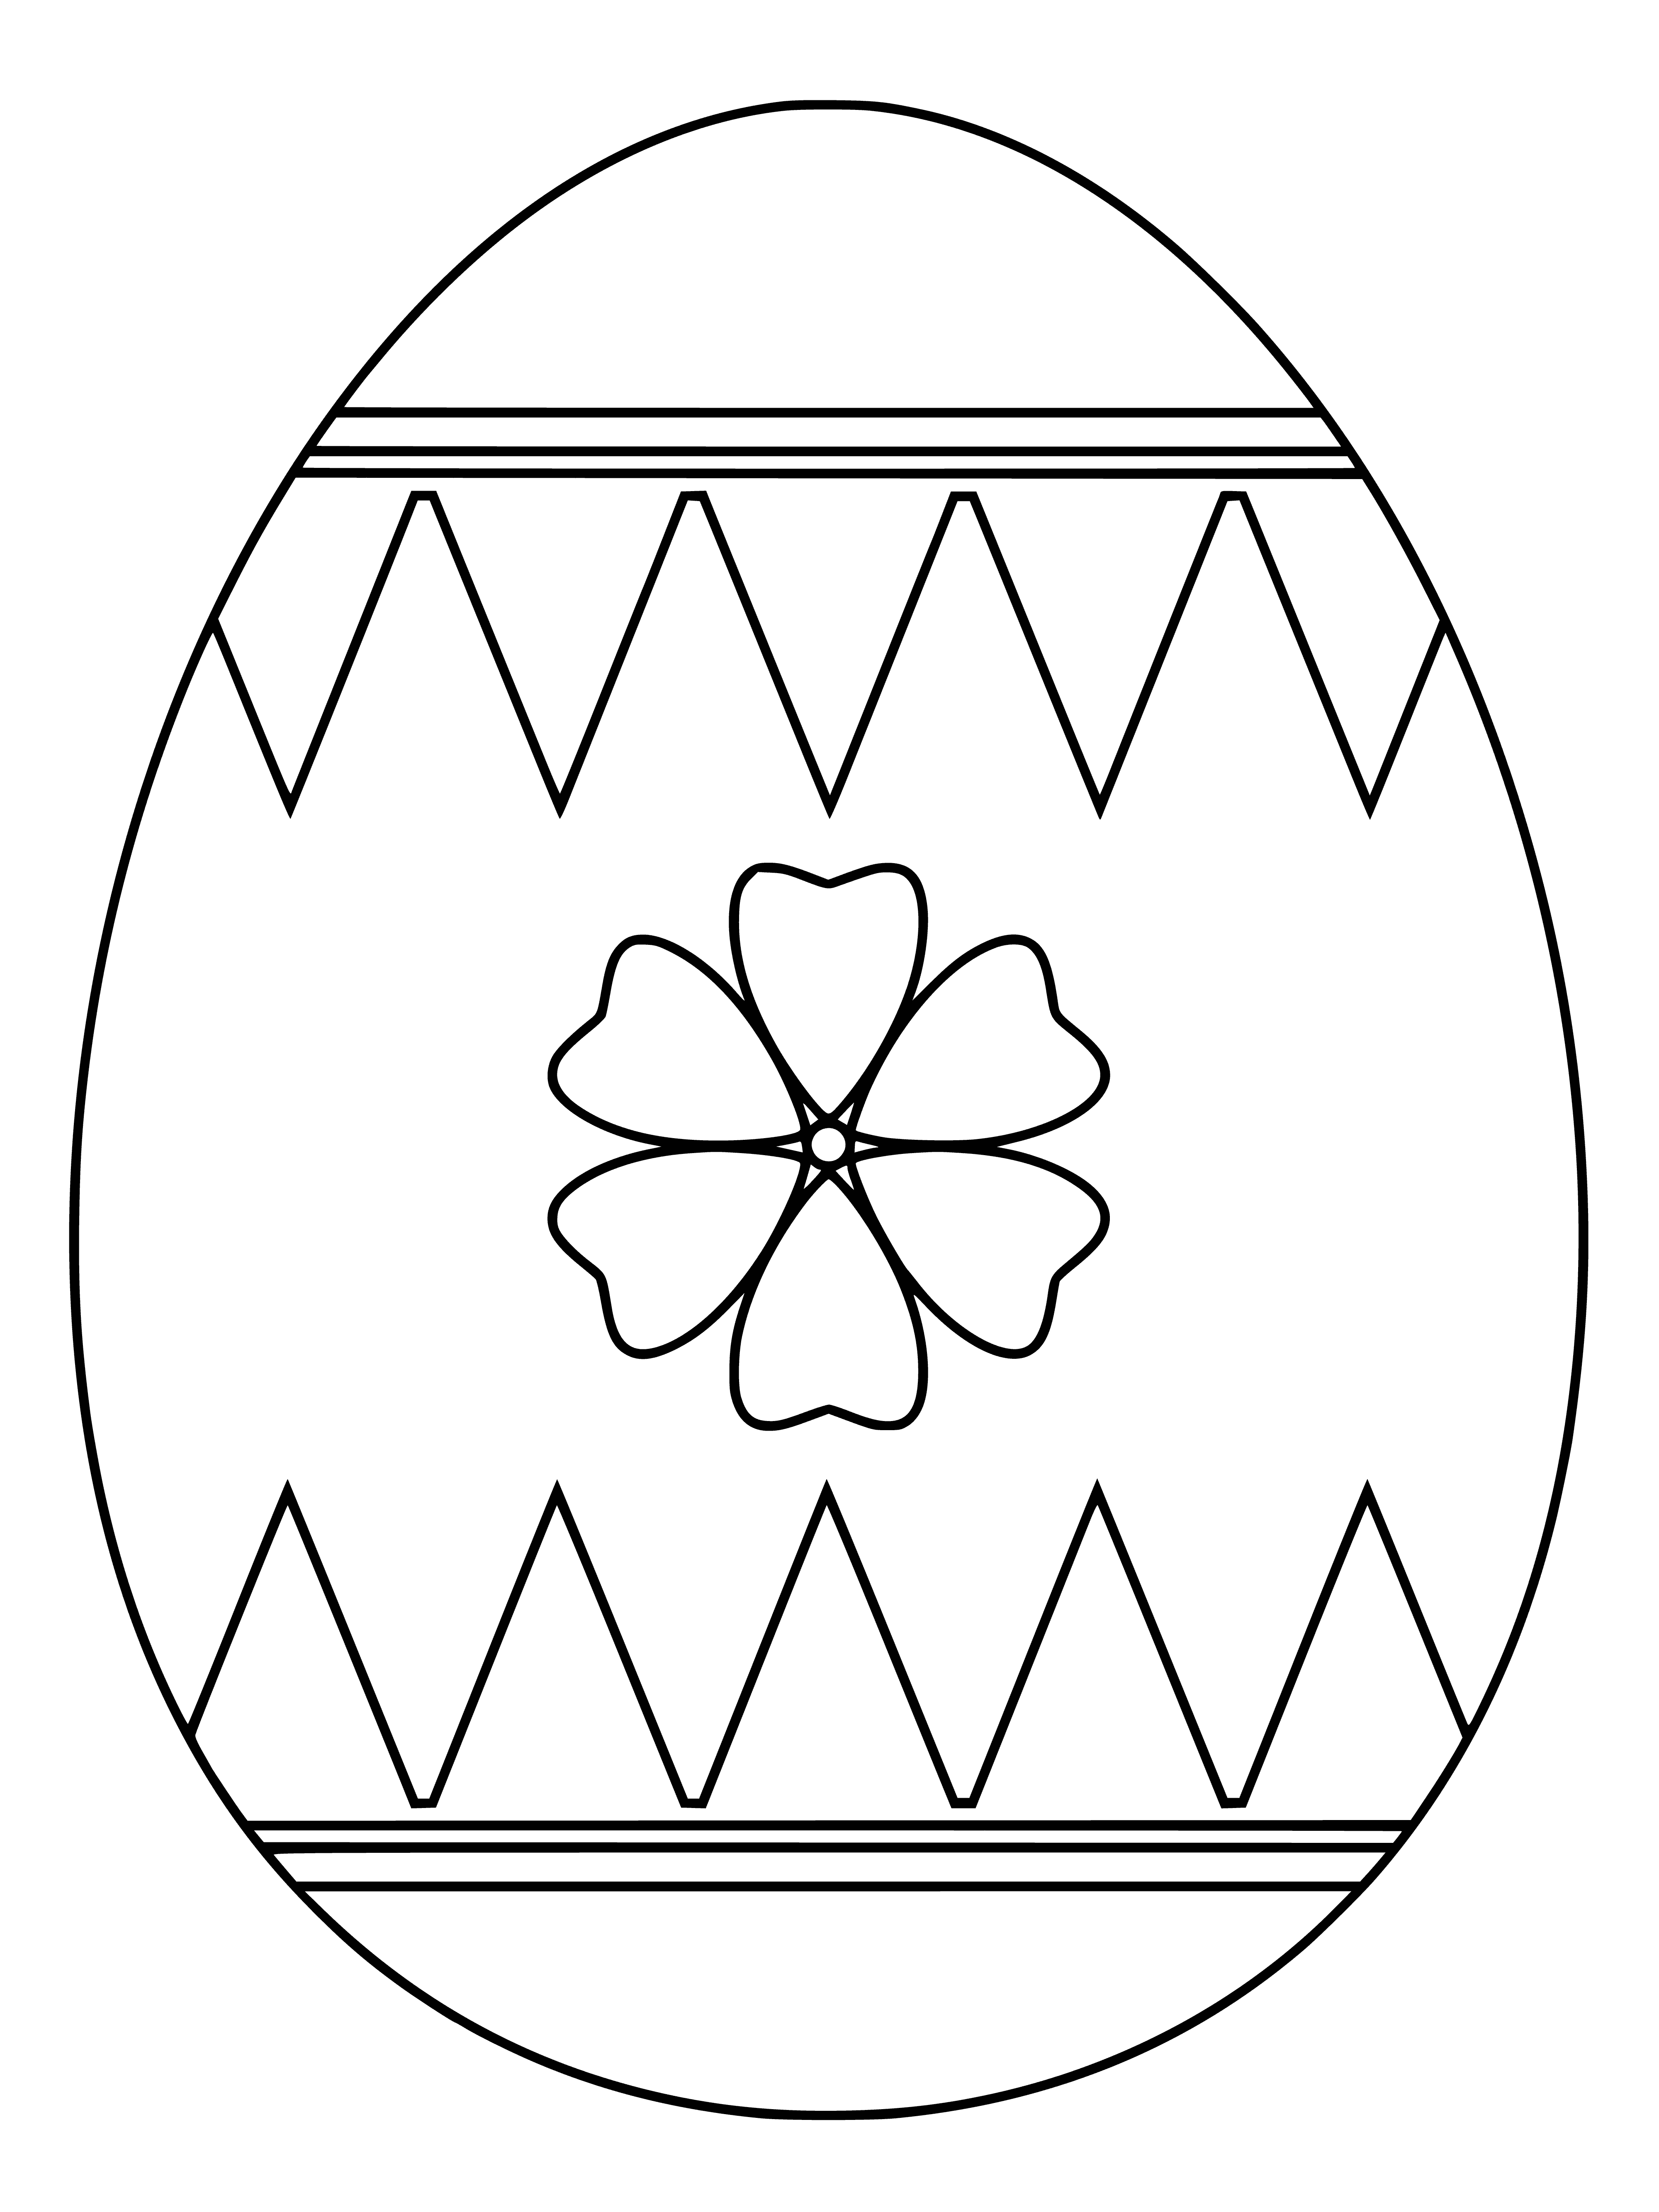 coloring page: Four colorful Easter eggs in a row, each with a white line around its middle.